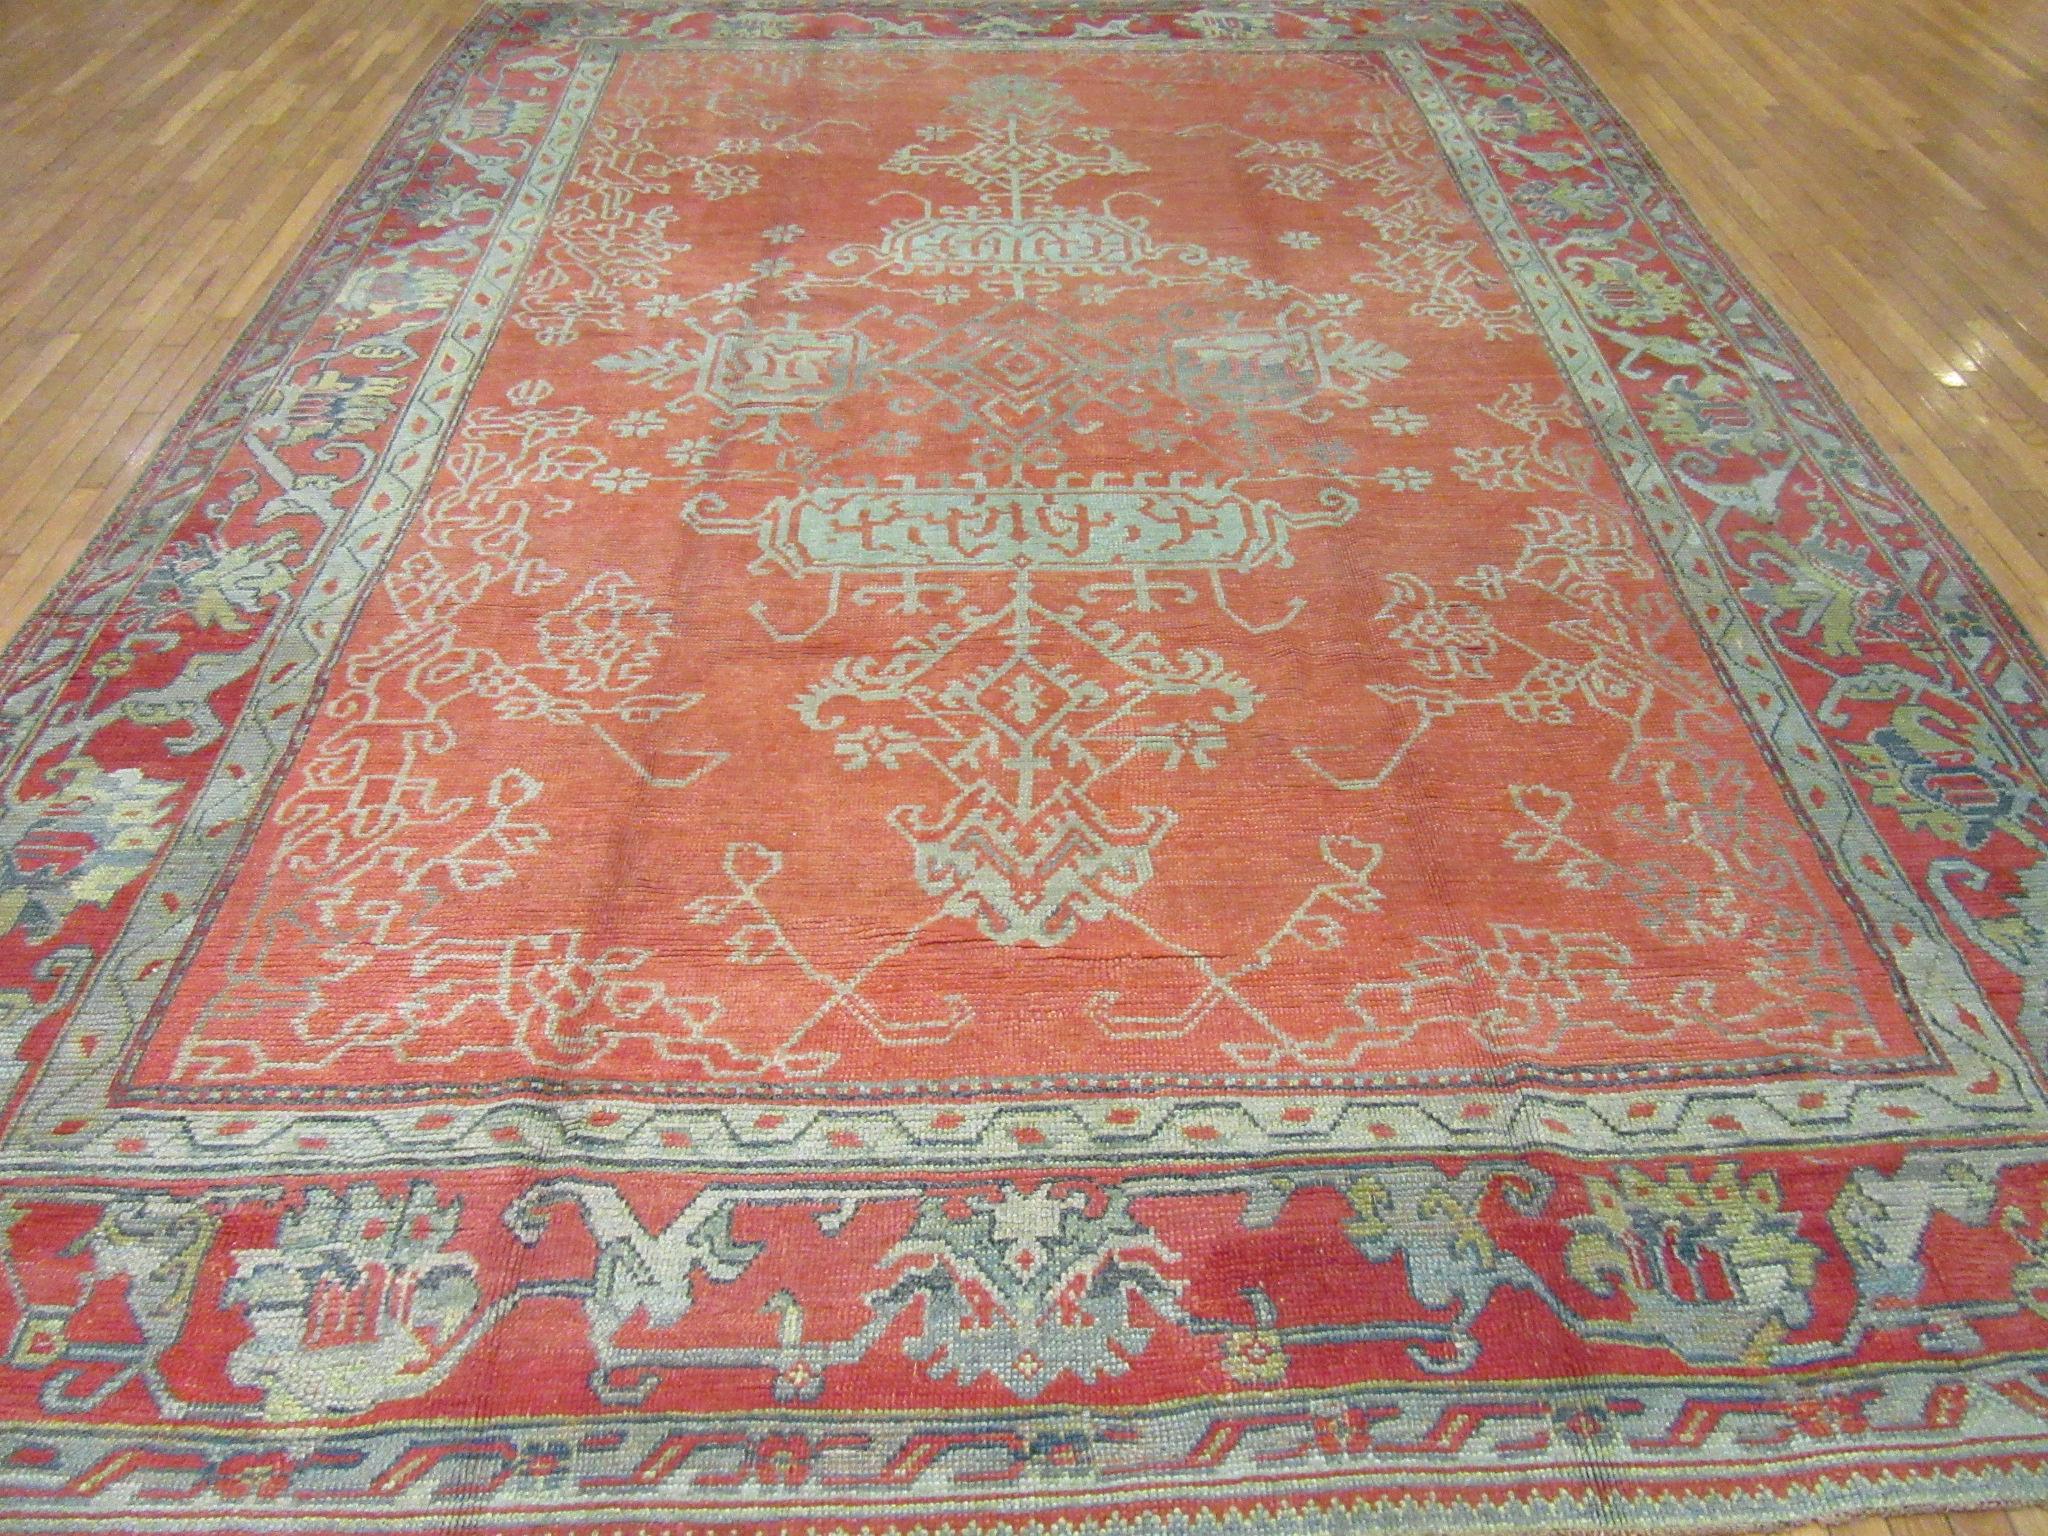 Large Antique Hand-Knotted Wool Coral Red Green Turkish Oushak Rug For Sale 9